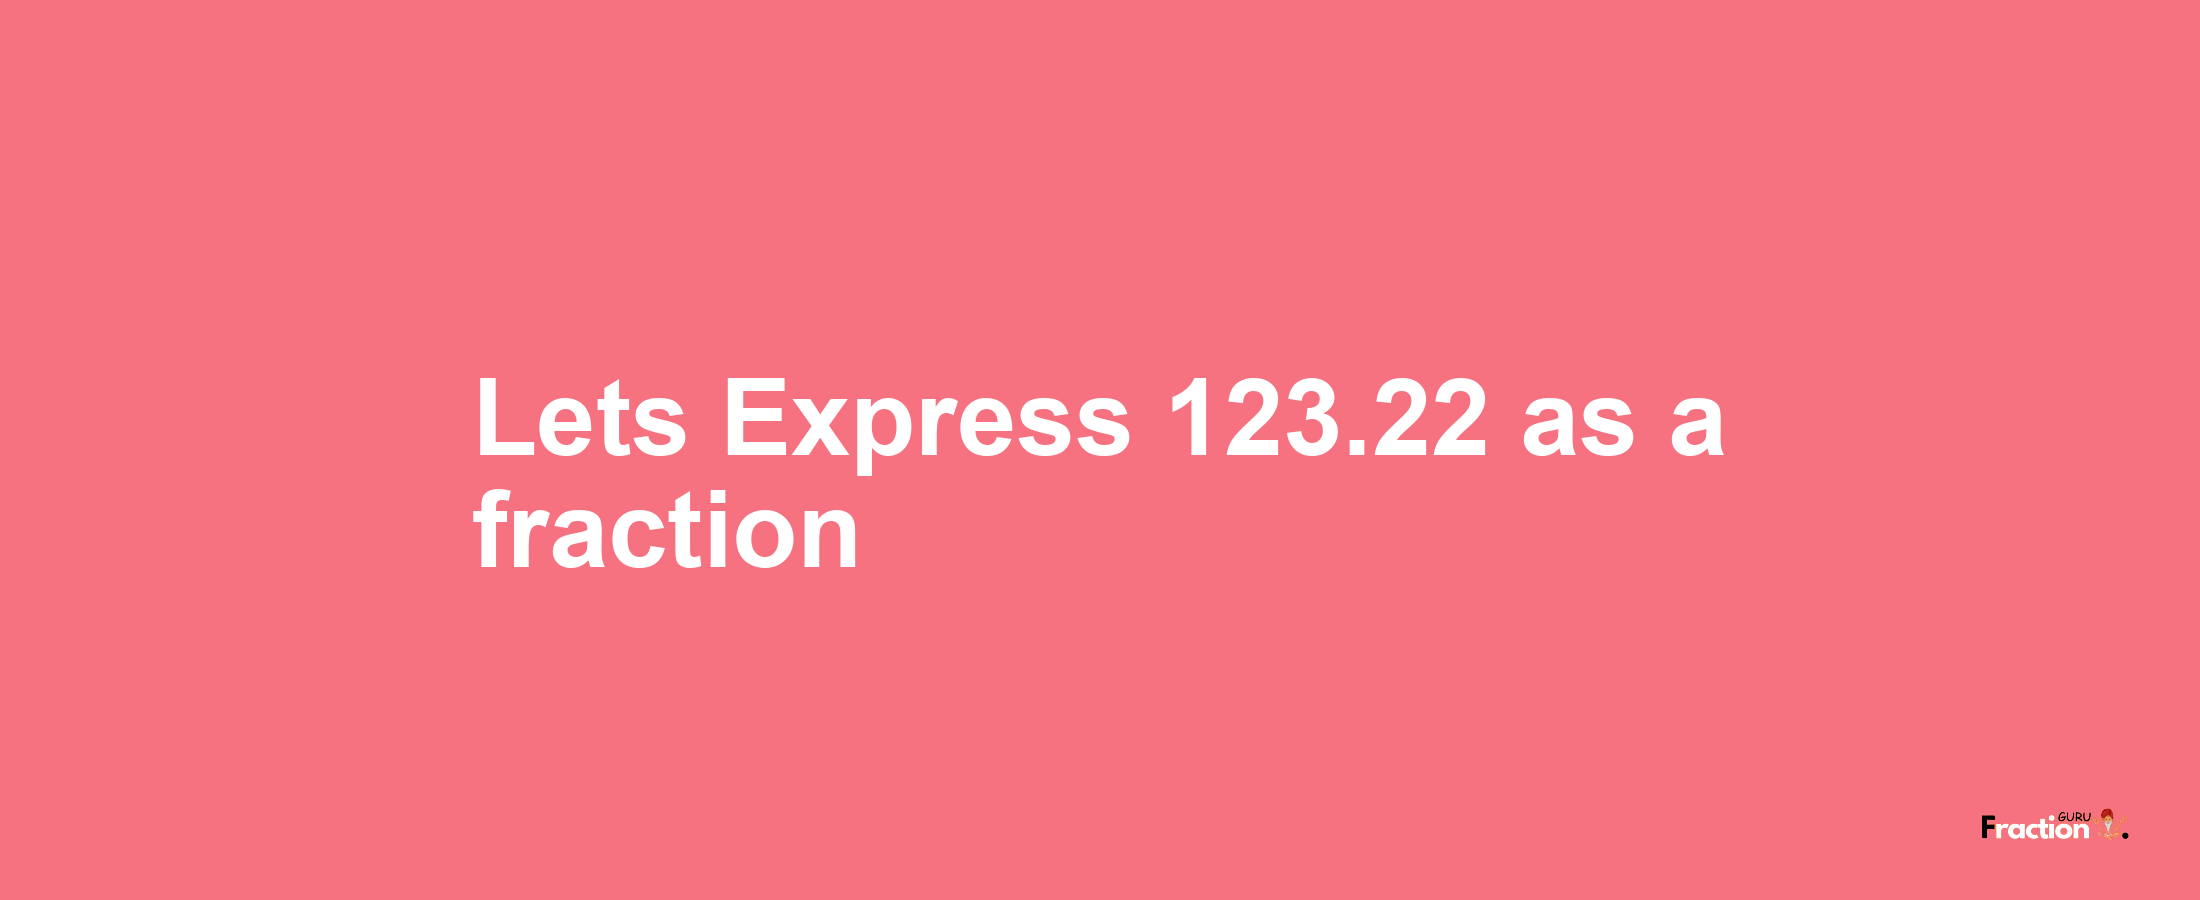 Lets Express 123.22 as afraction